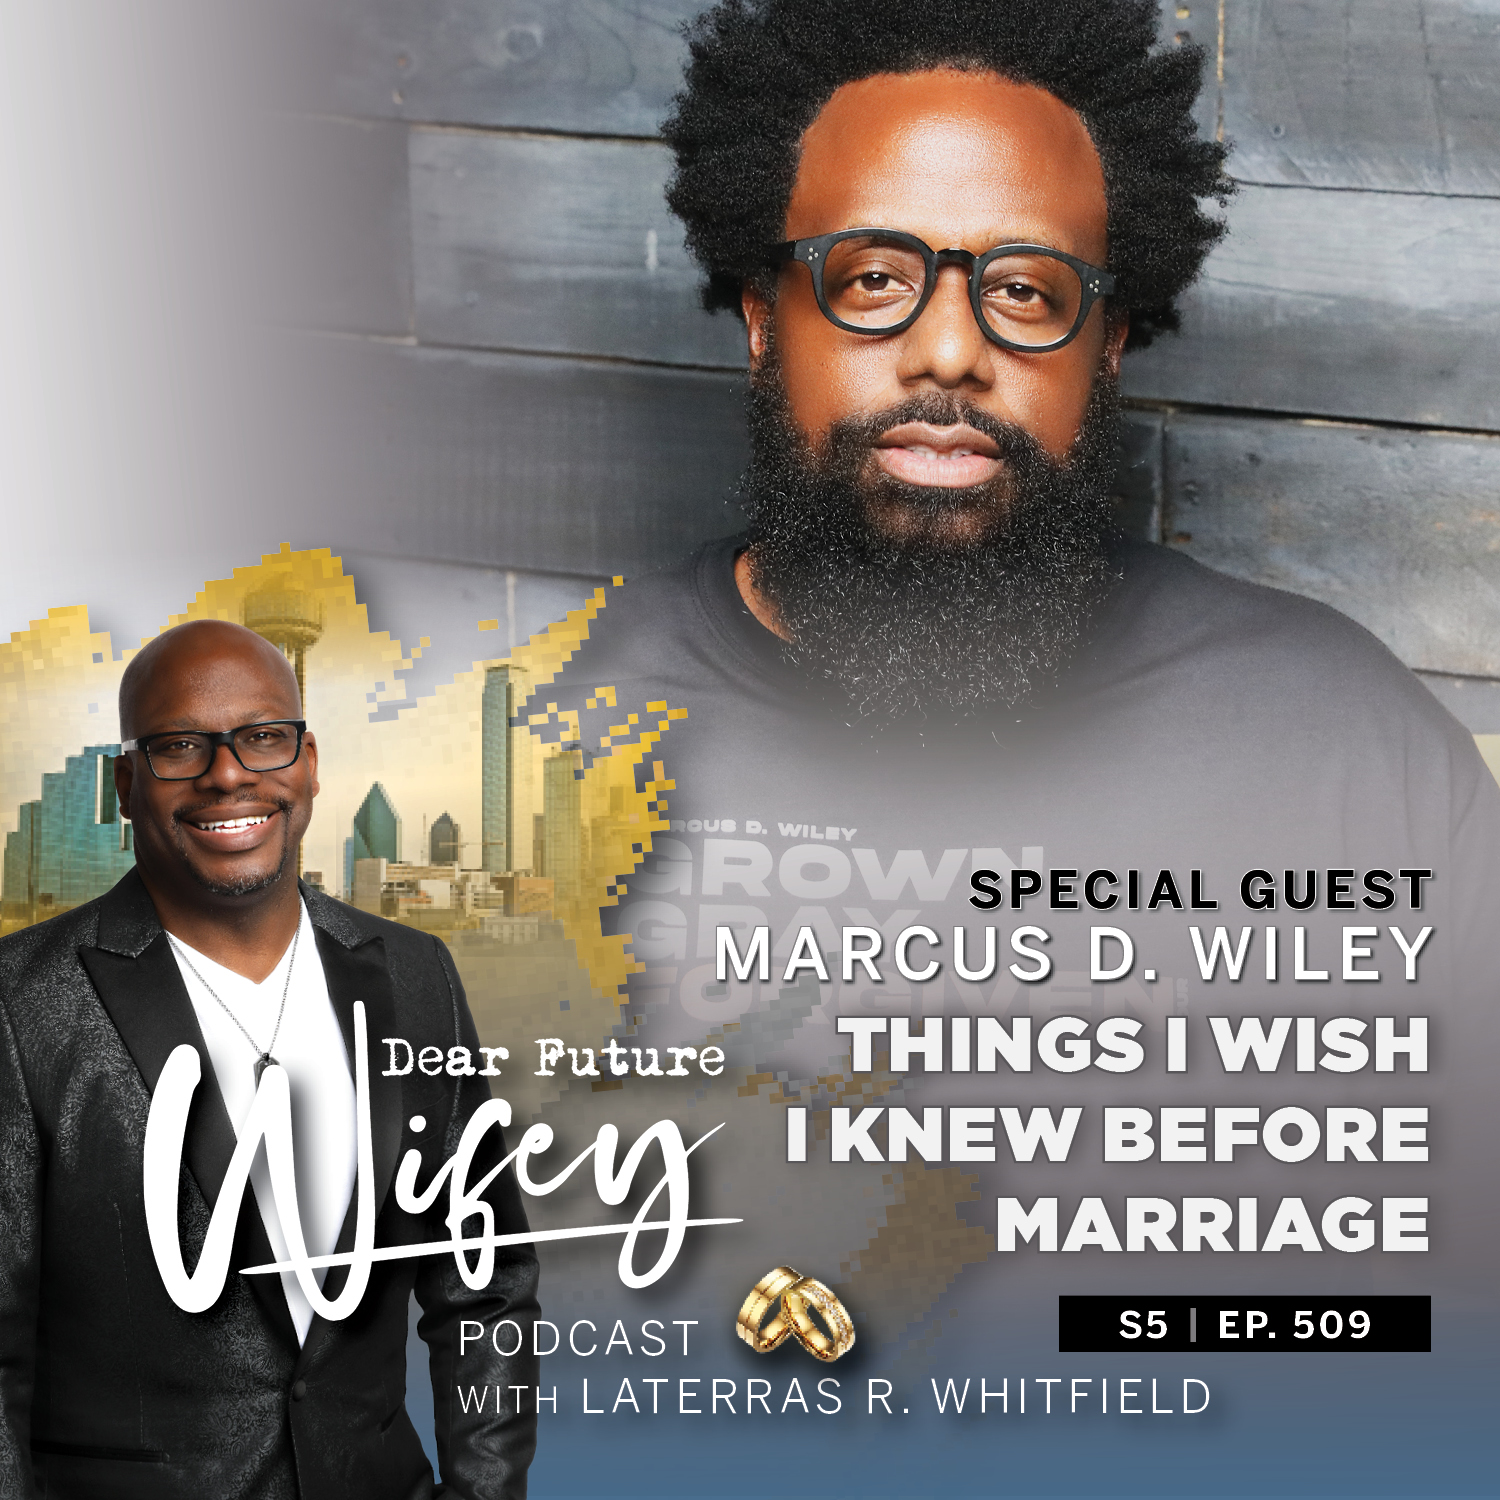 Things I Wish I Knew Before Marriage  (Guest: Marcus D. Wiley)